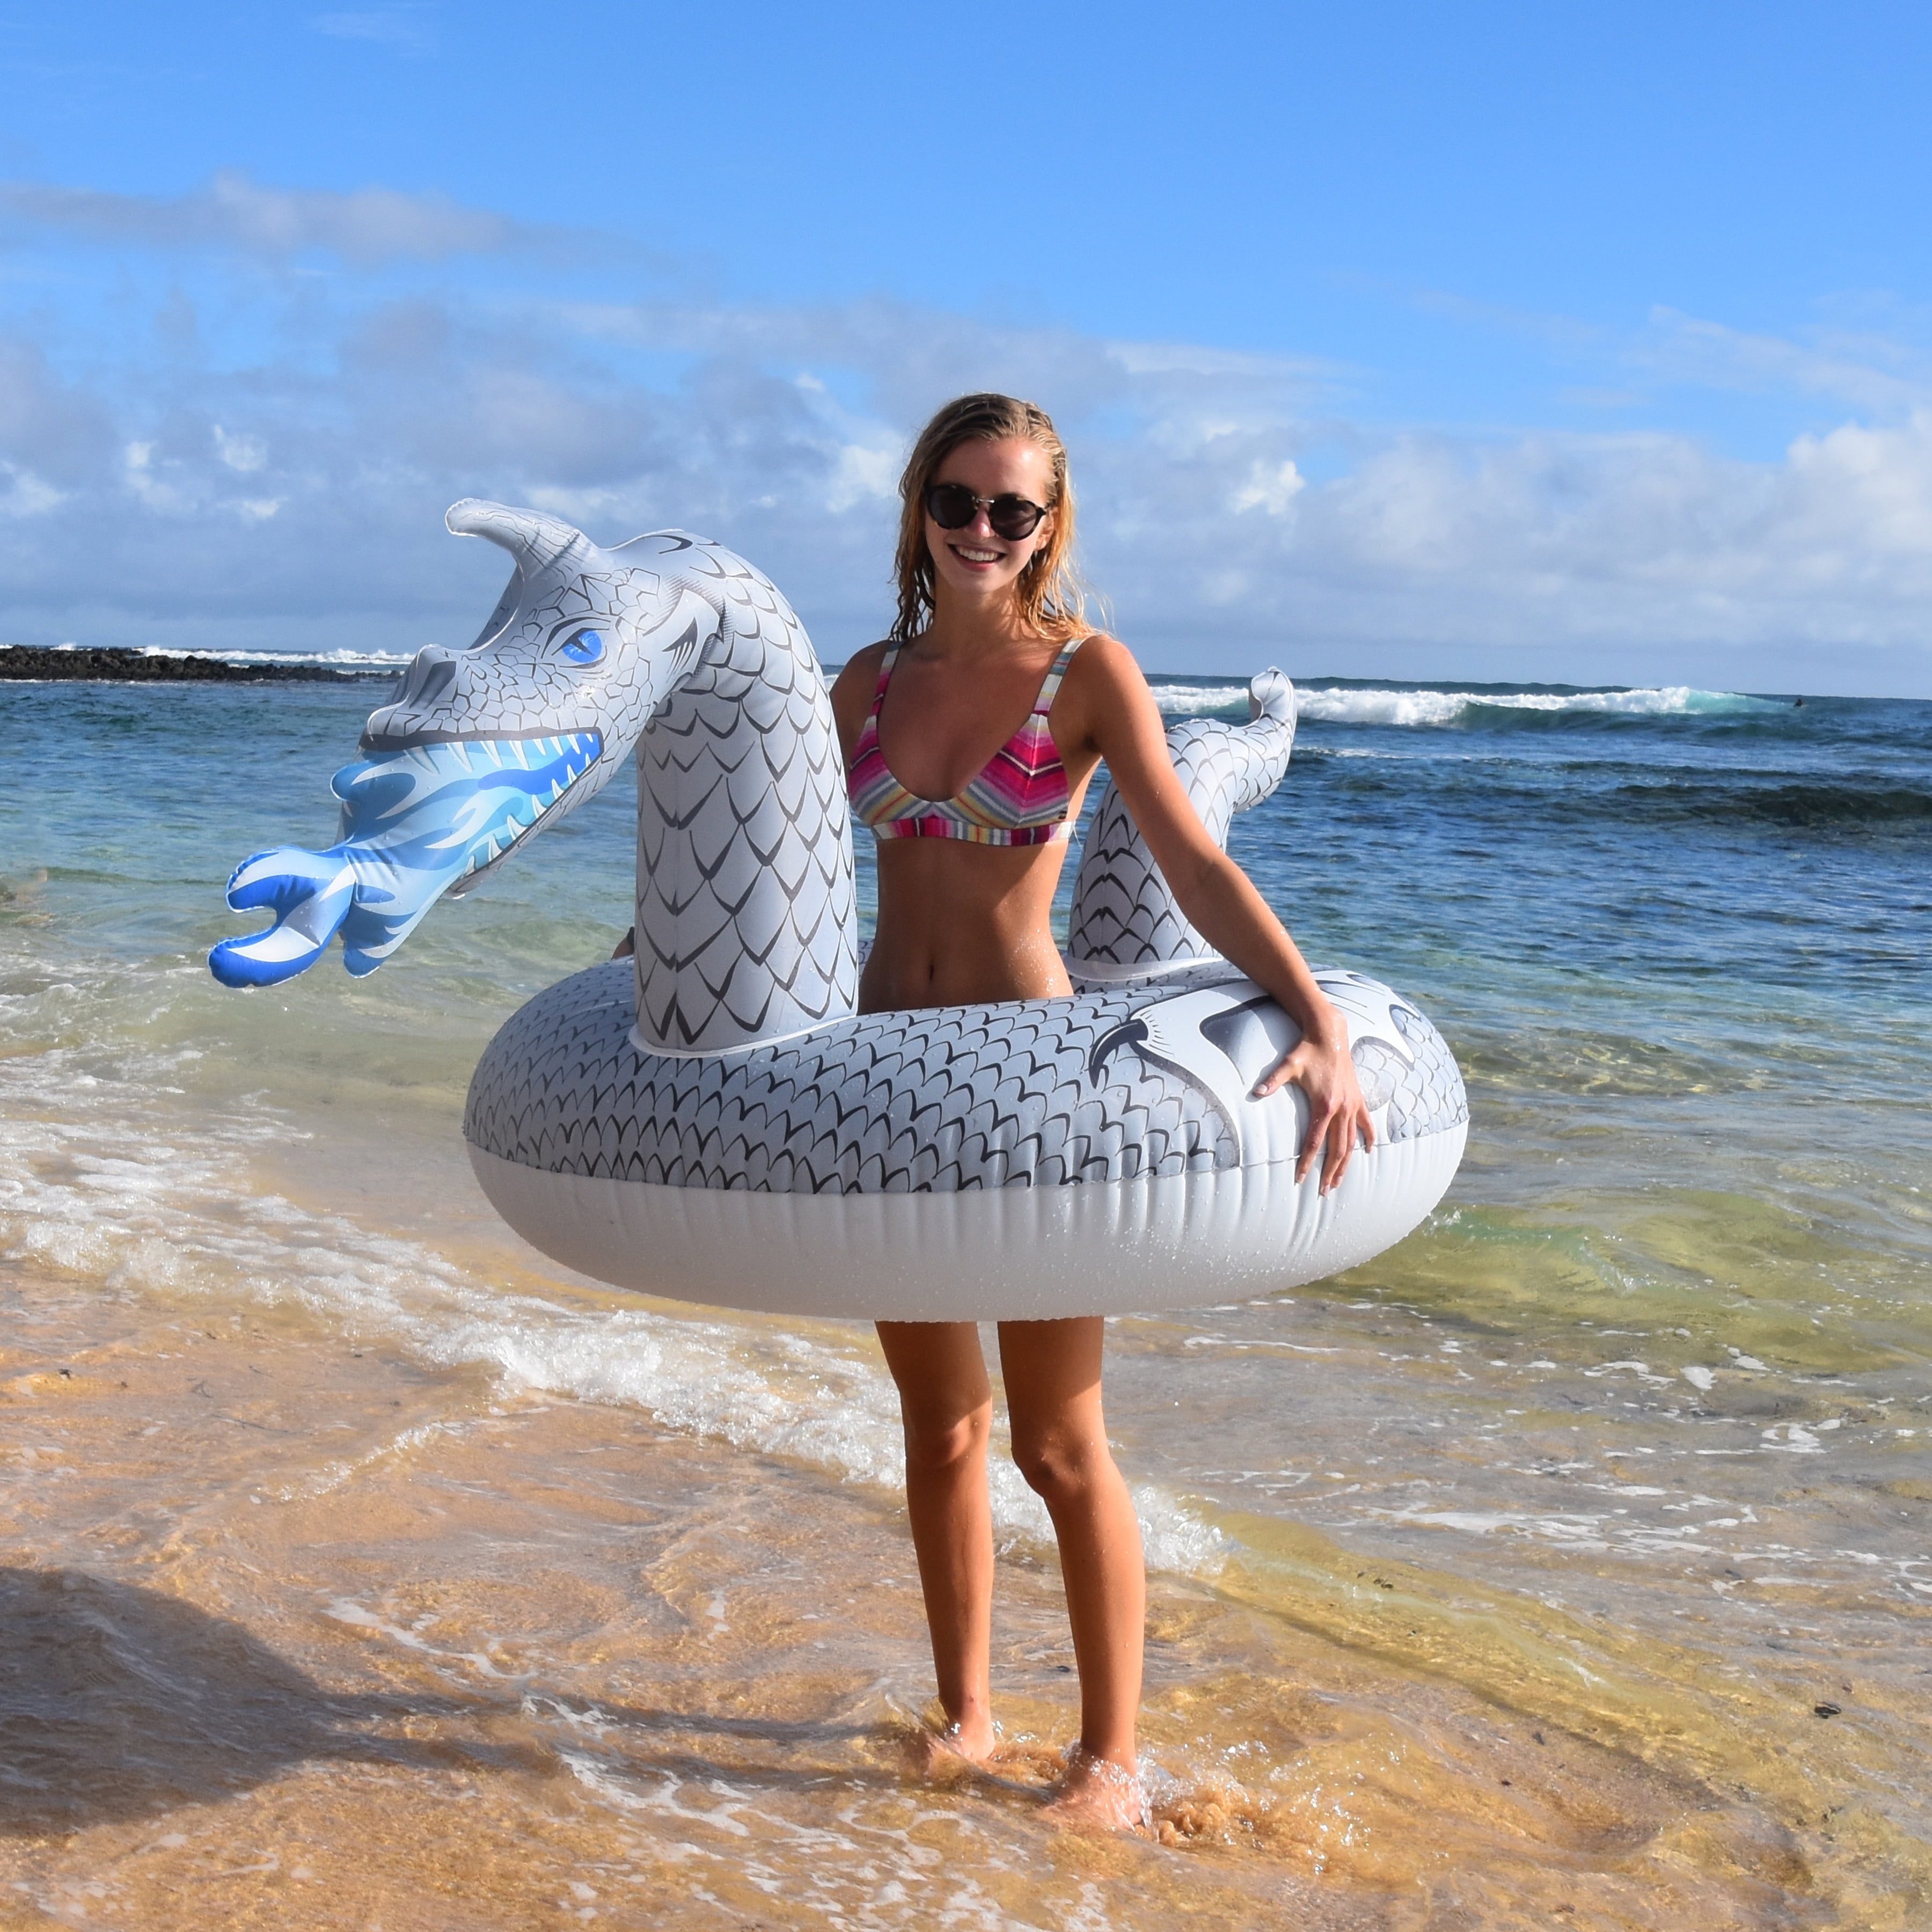 Summer Pool Floats Fire & Ice Dragons Inflatable Lake Beach Raft Party Float NEW